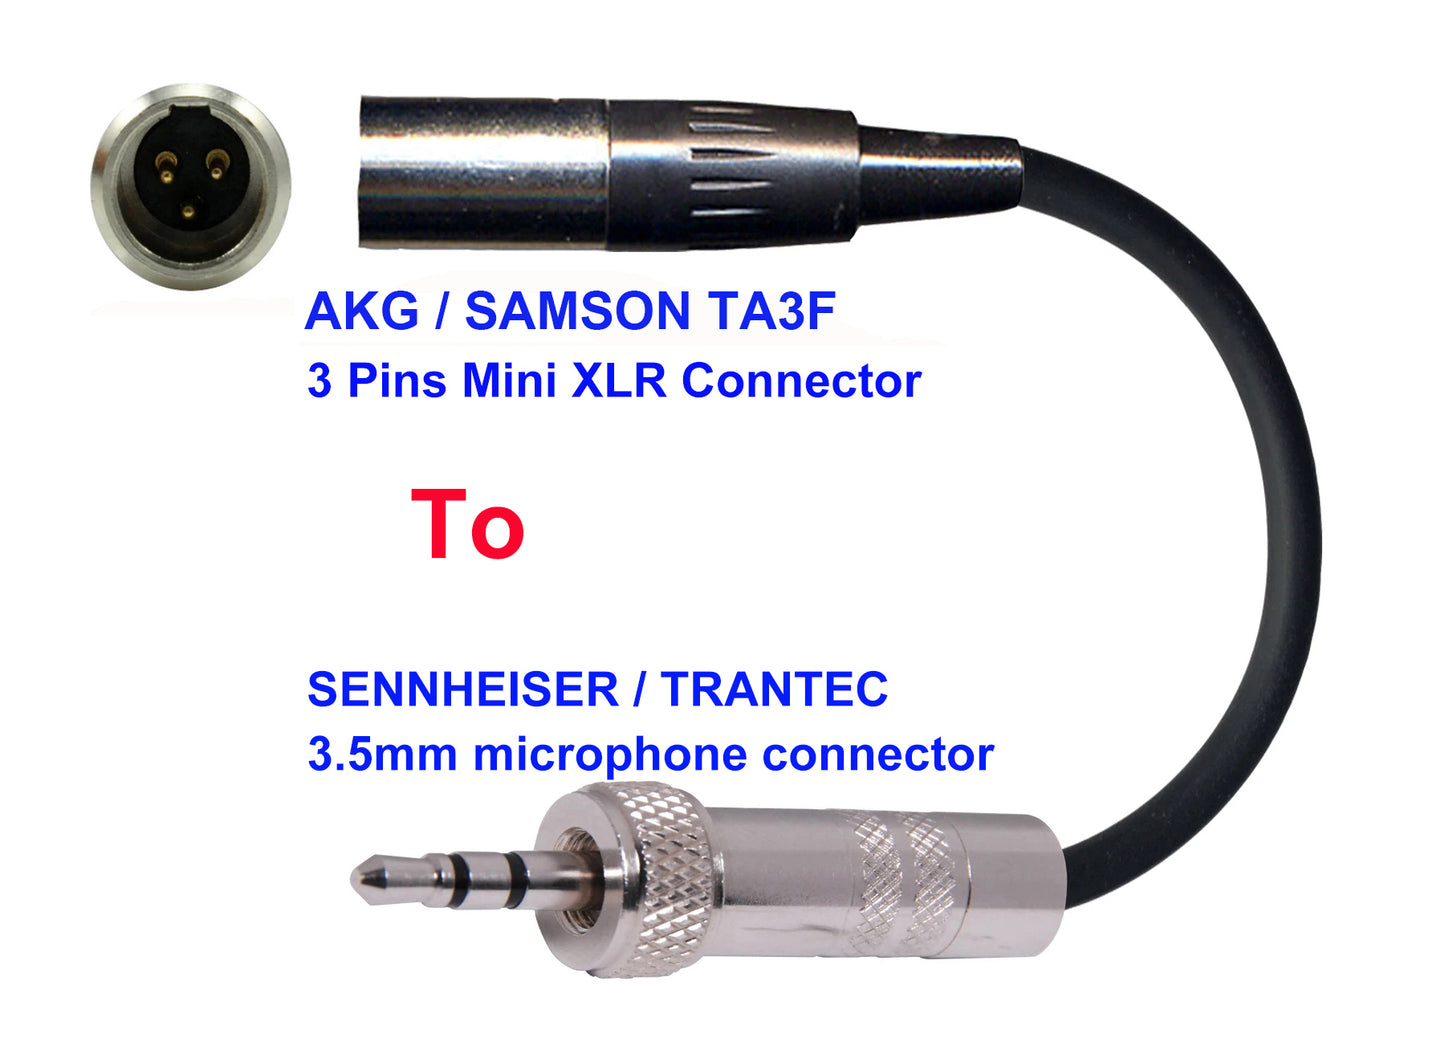 Microphone Adapter - AKG / Samson Microphones with TA3F 3 pin mini XLR  connector TO Sennheiser / Trantec Transmitters with 3.5mm locking connector